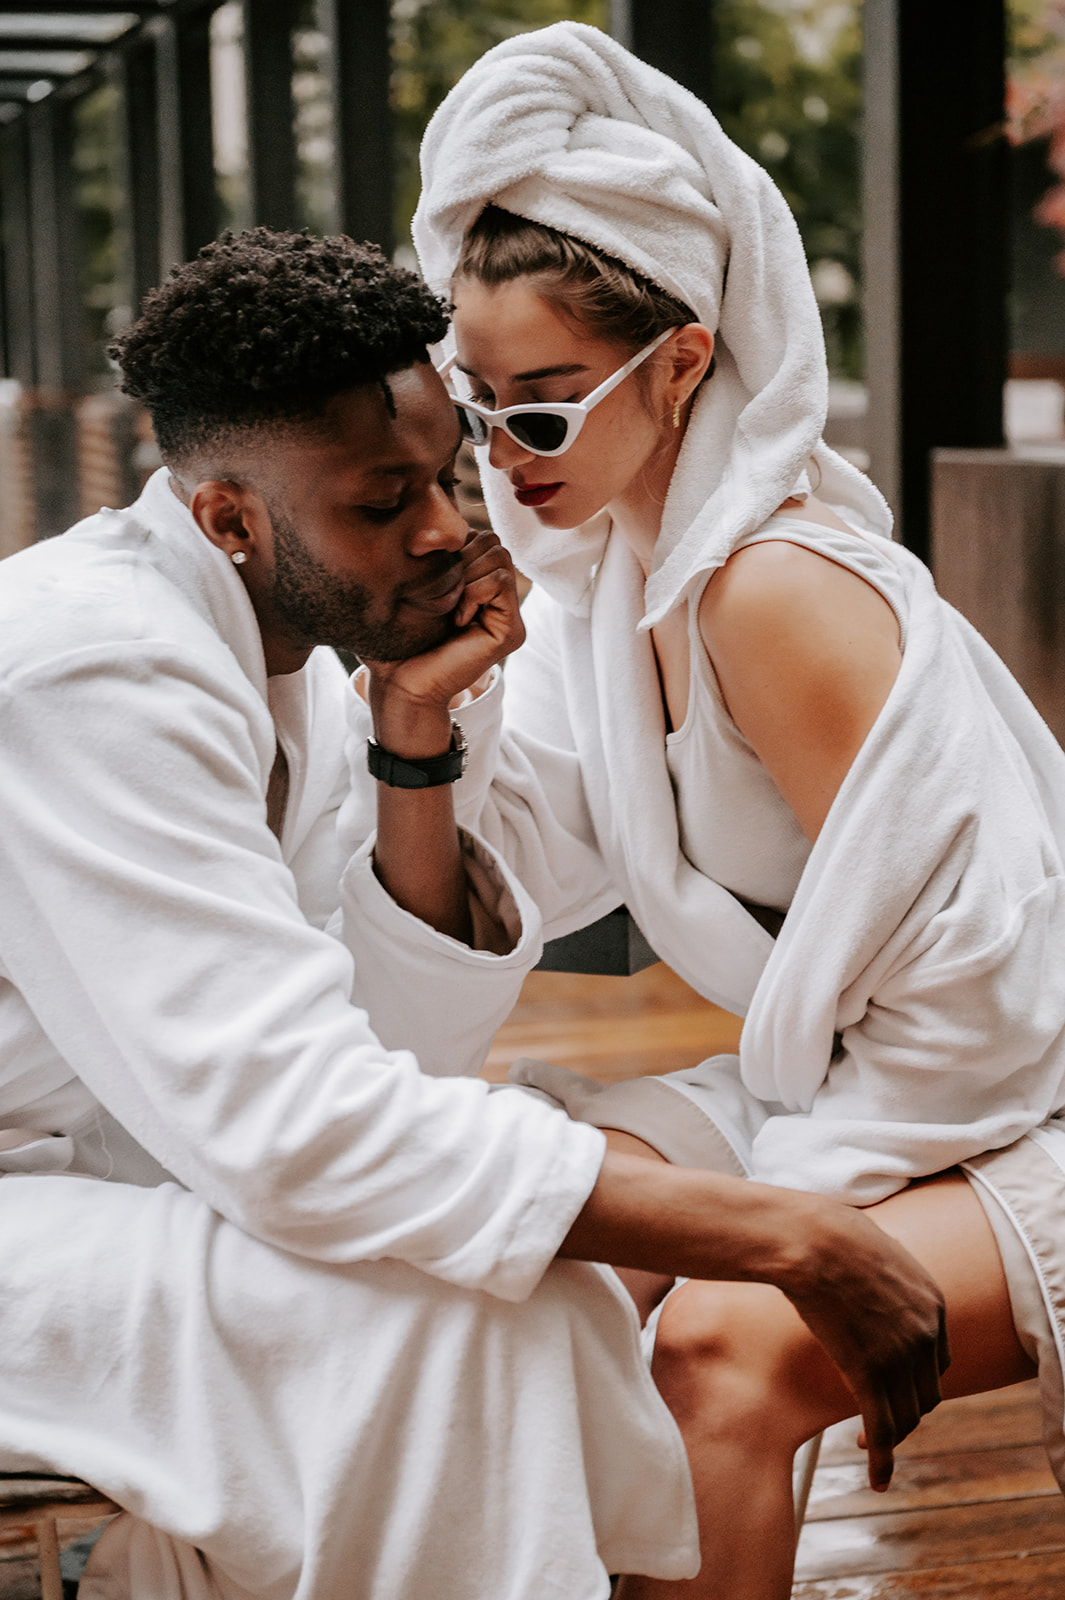 Couple embracing at hotel zags in downtown portland. Wearing robes and she has a towel on her head and white sunglasses